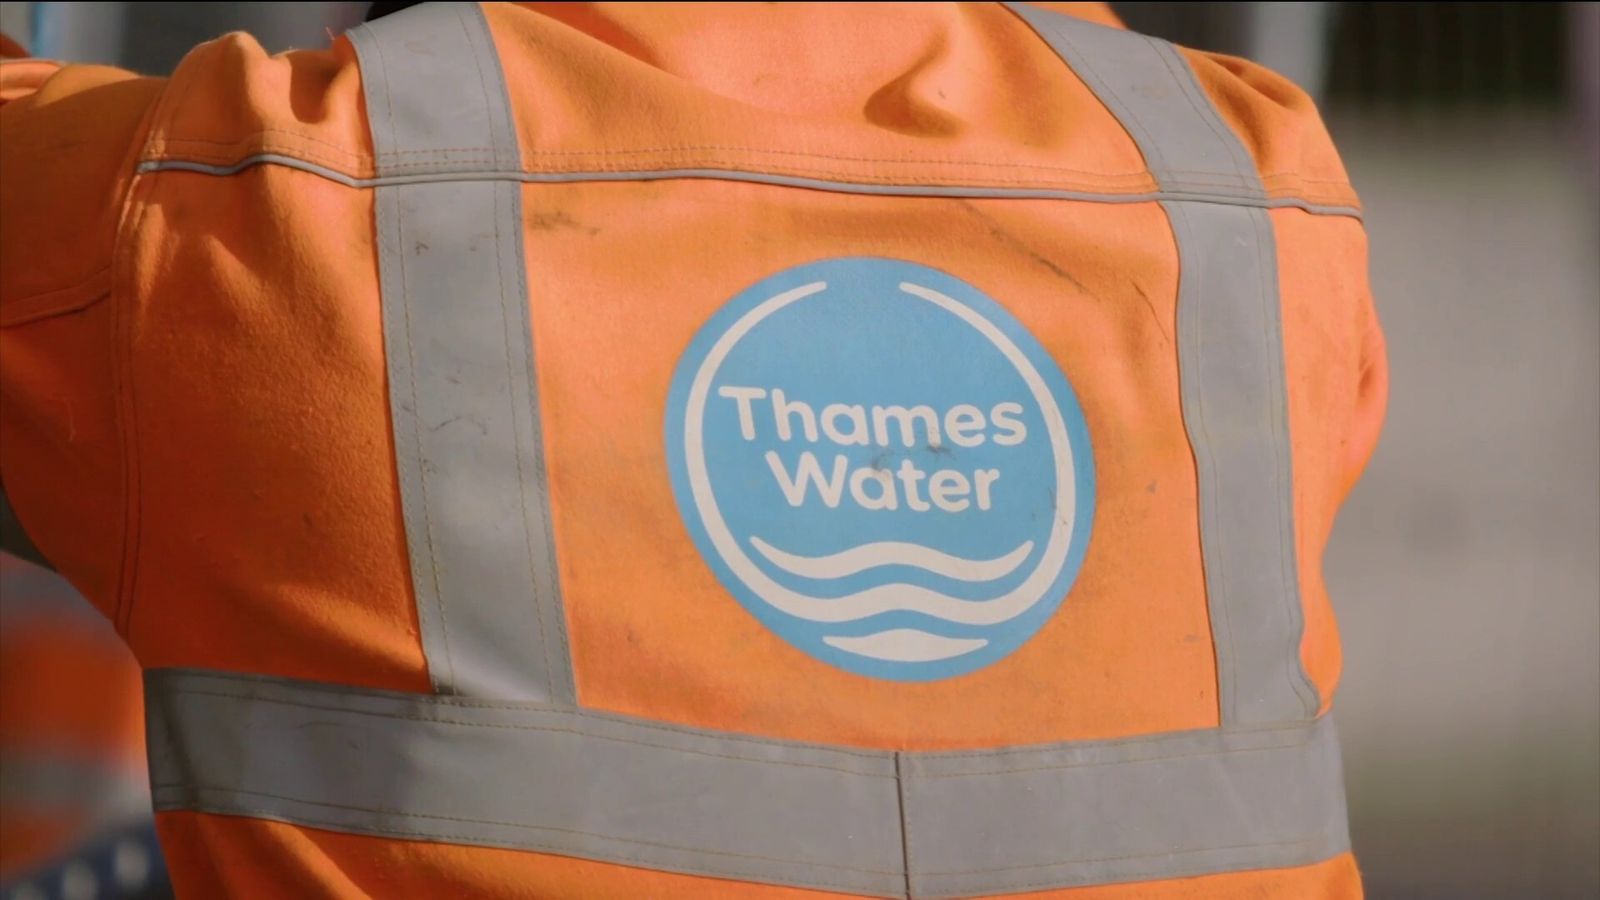 What's gone wrong at Thames Water? | UK News | Sky News